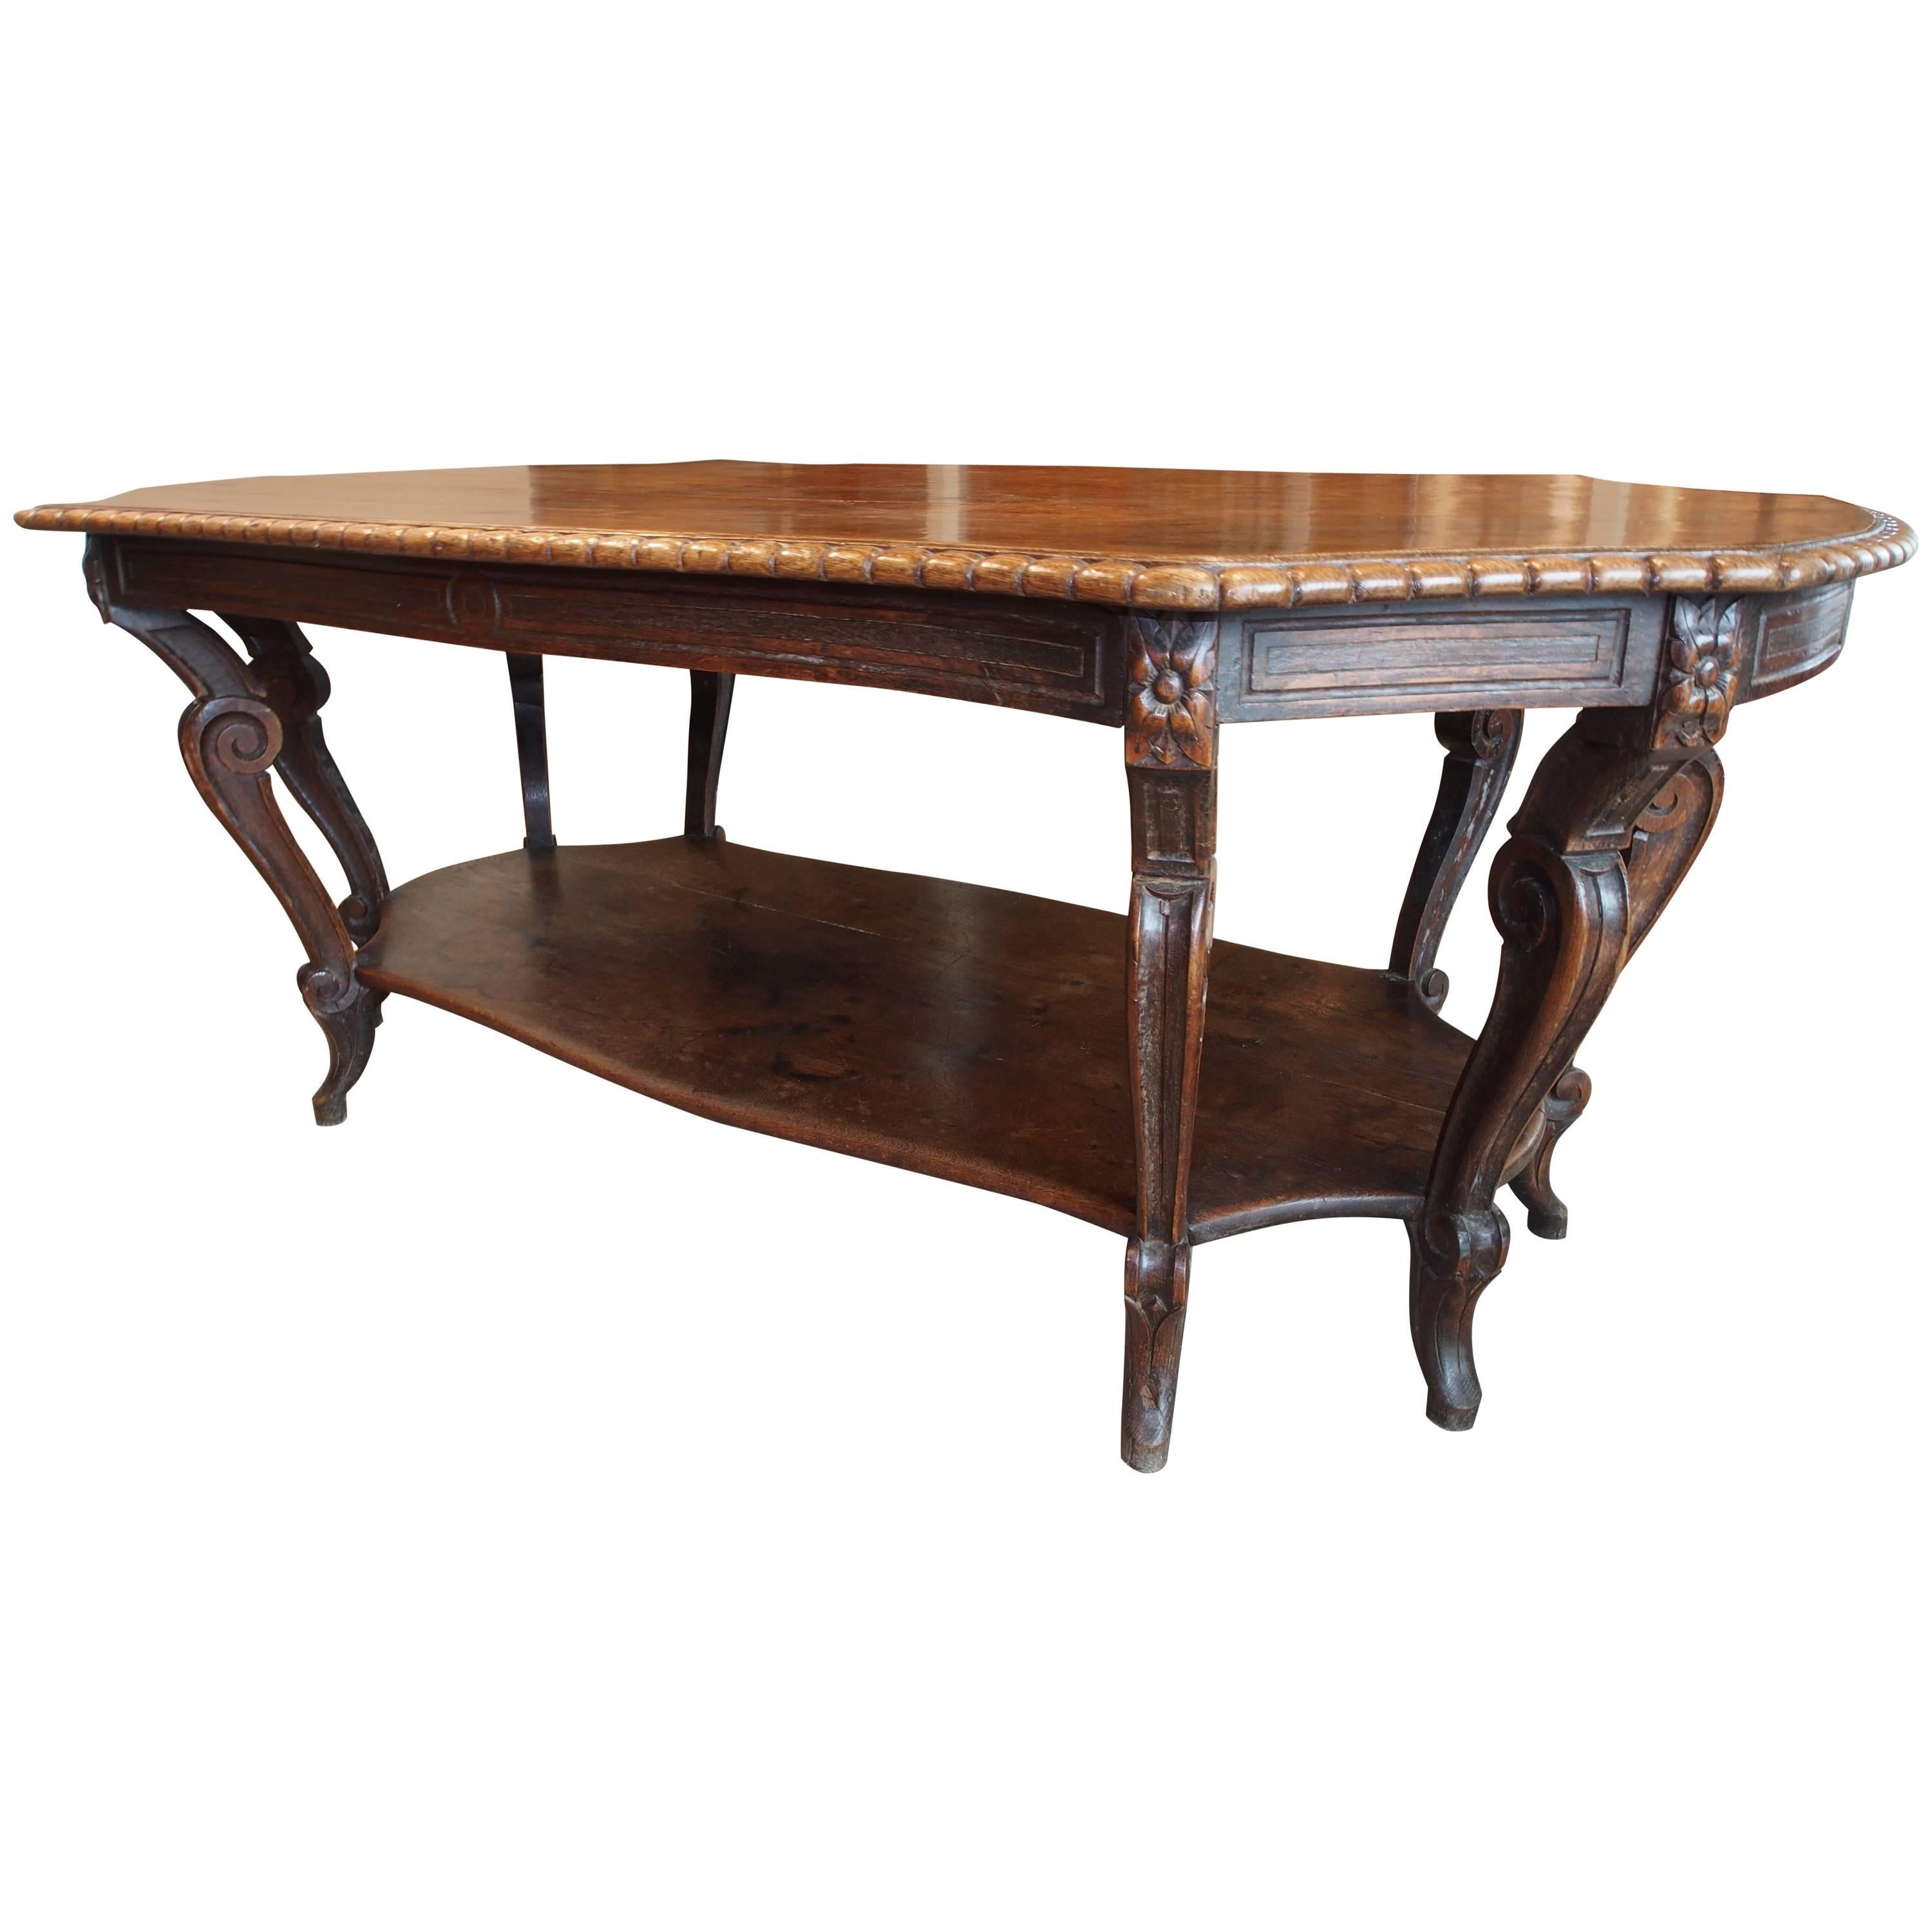 Italian Walnut Carved Table, 19th Century, with 8 Curved Legs and Low Shelf For Sale